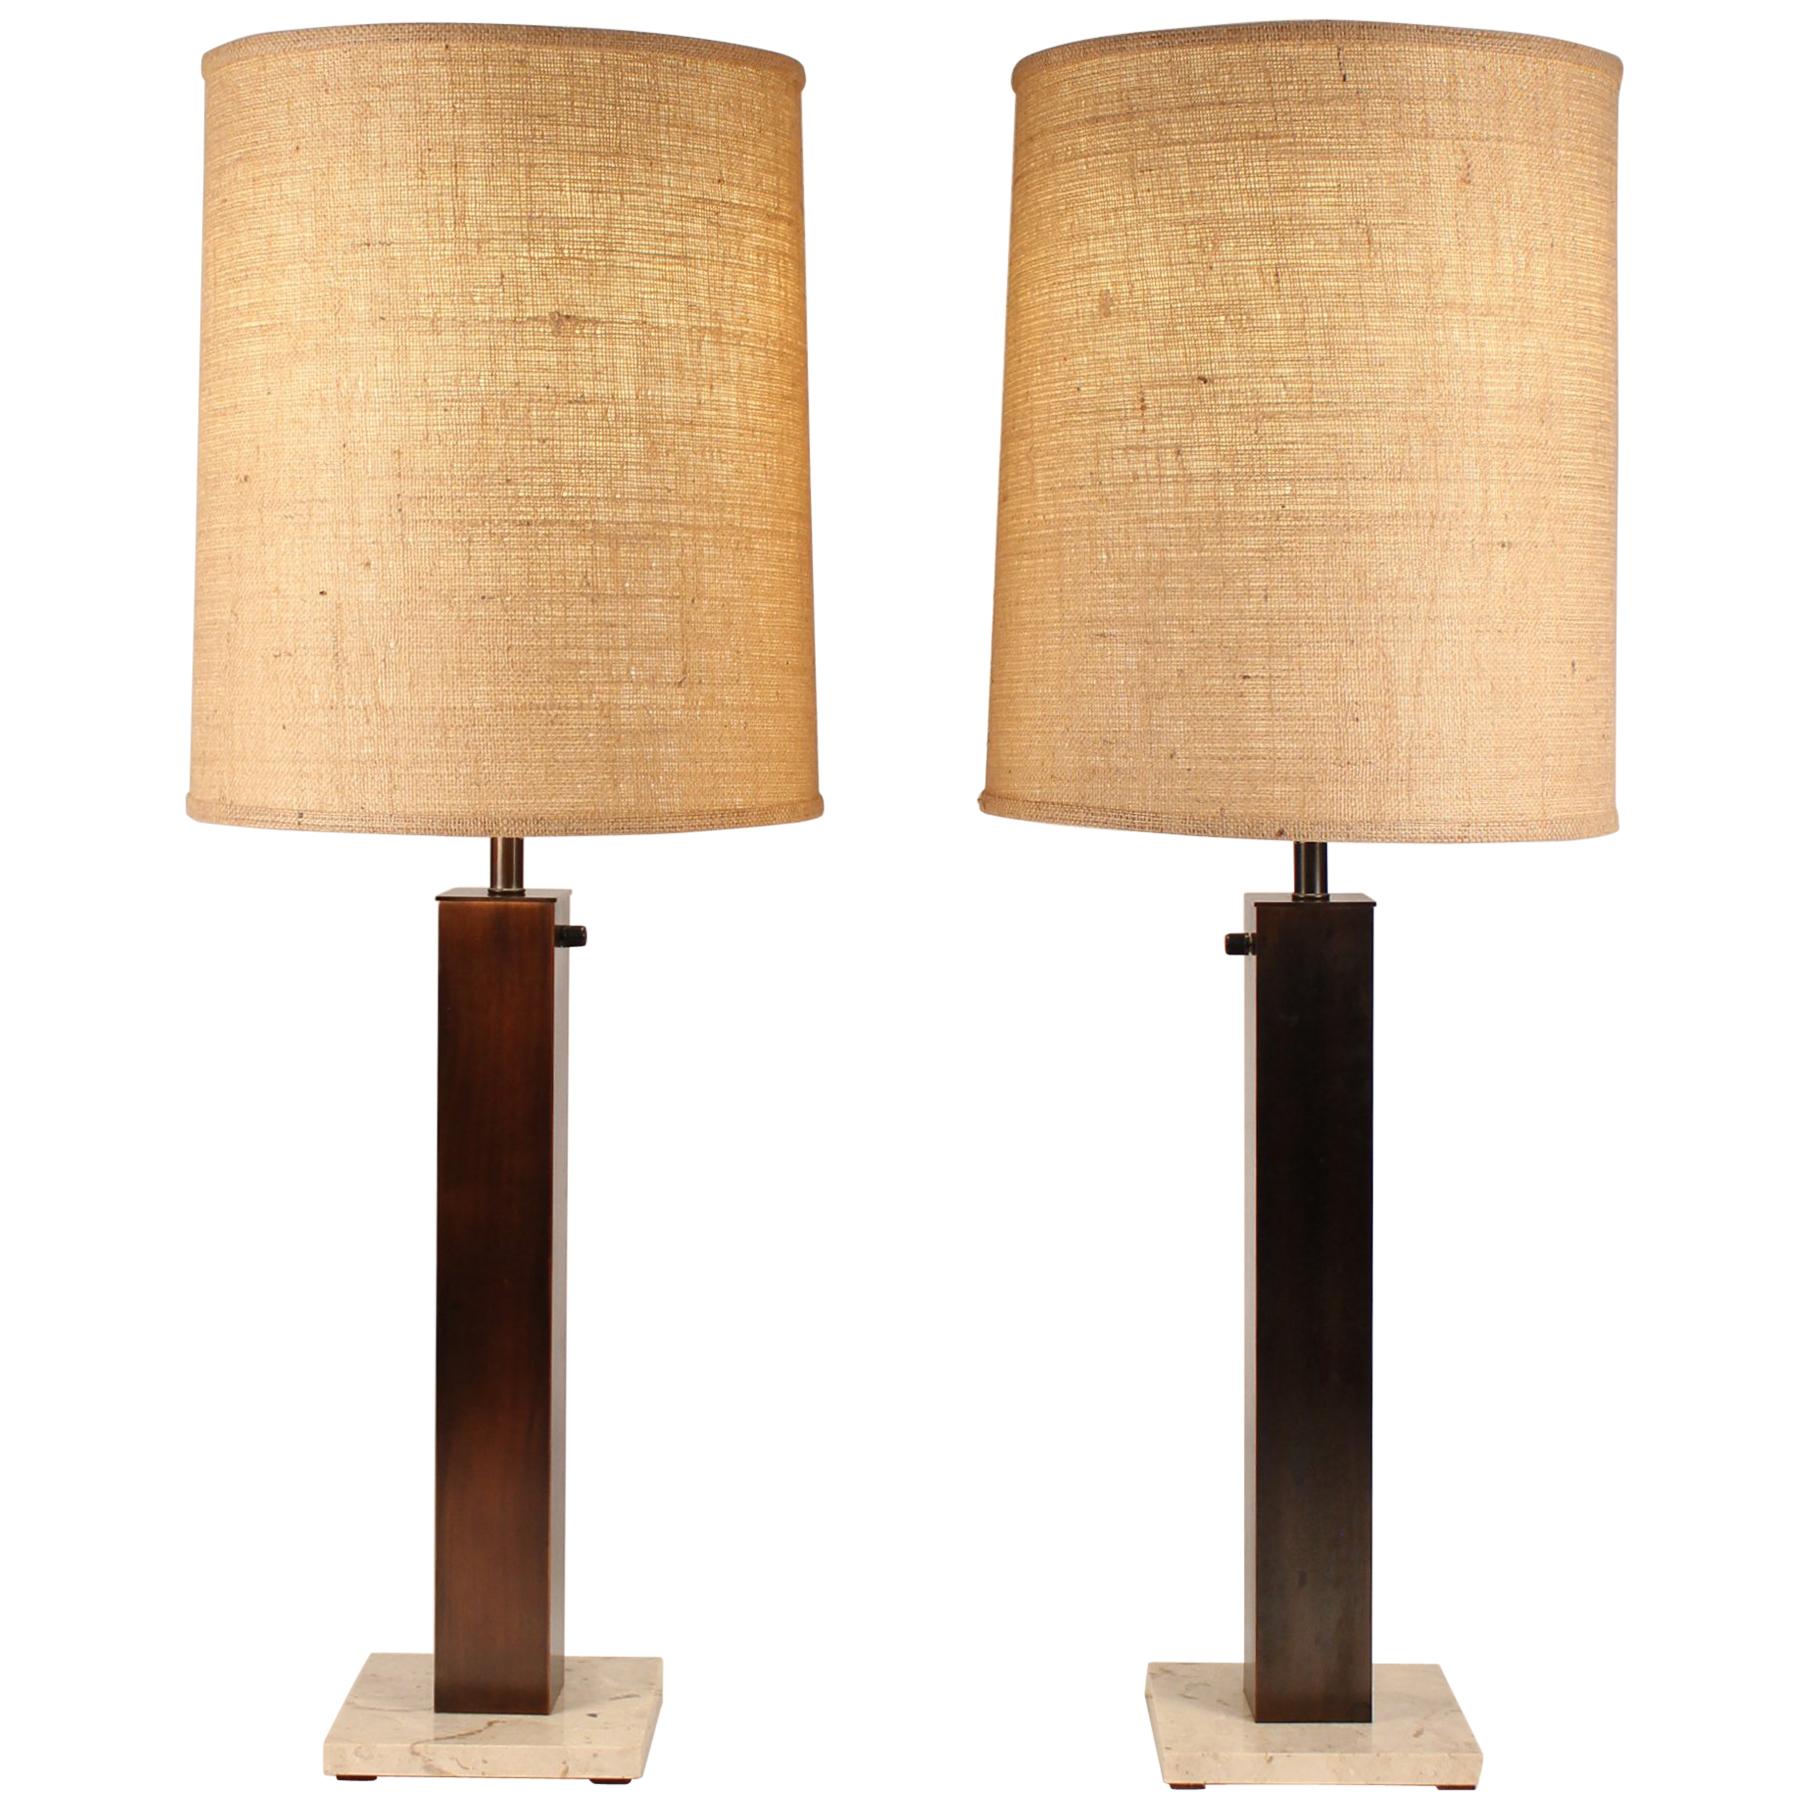 Pair of 1960s Oil Rubbed Bronze and Travertine Table Lamps by Nessen